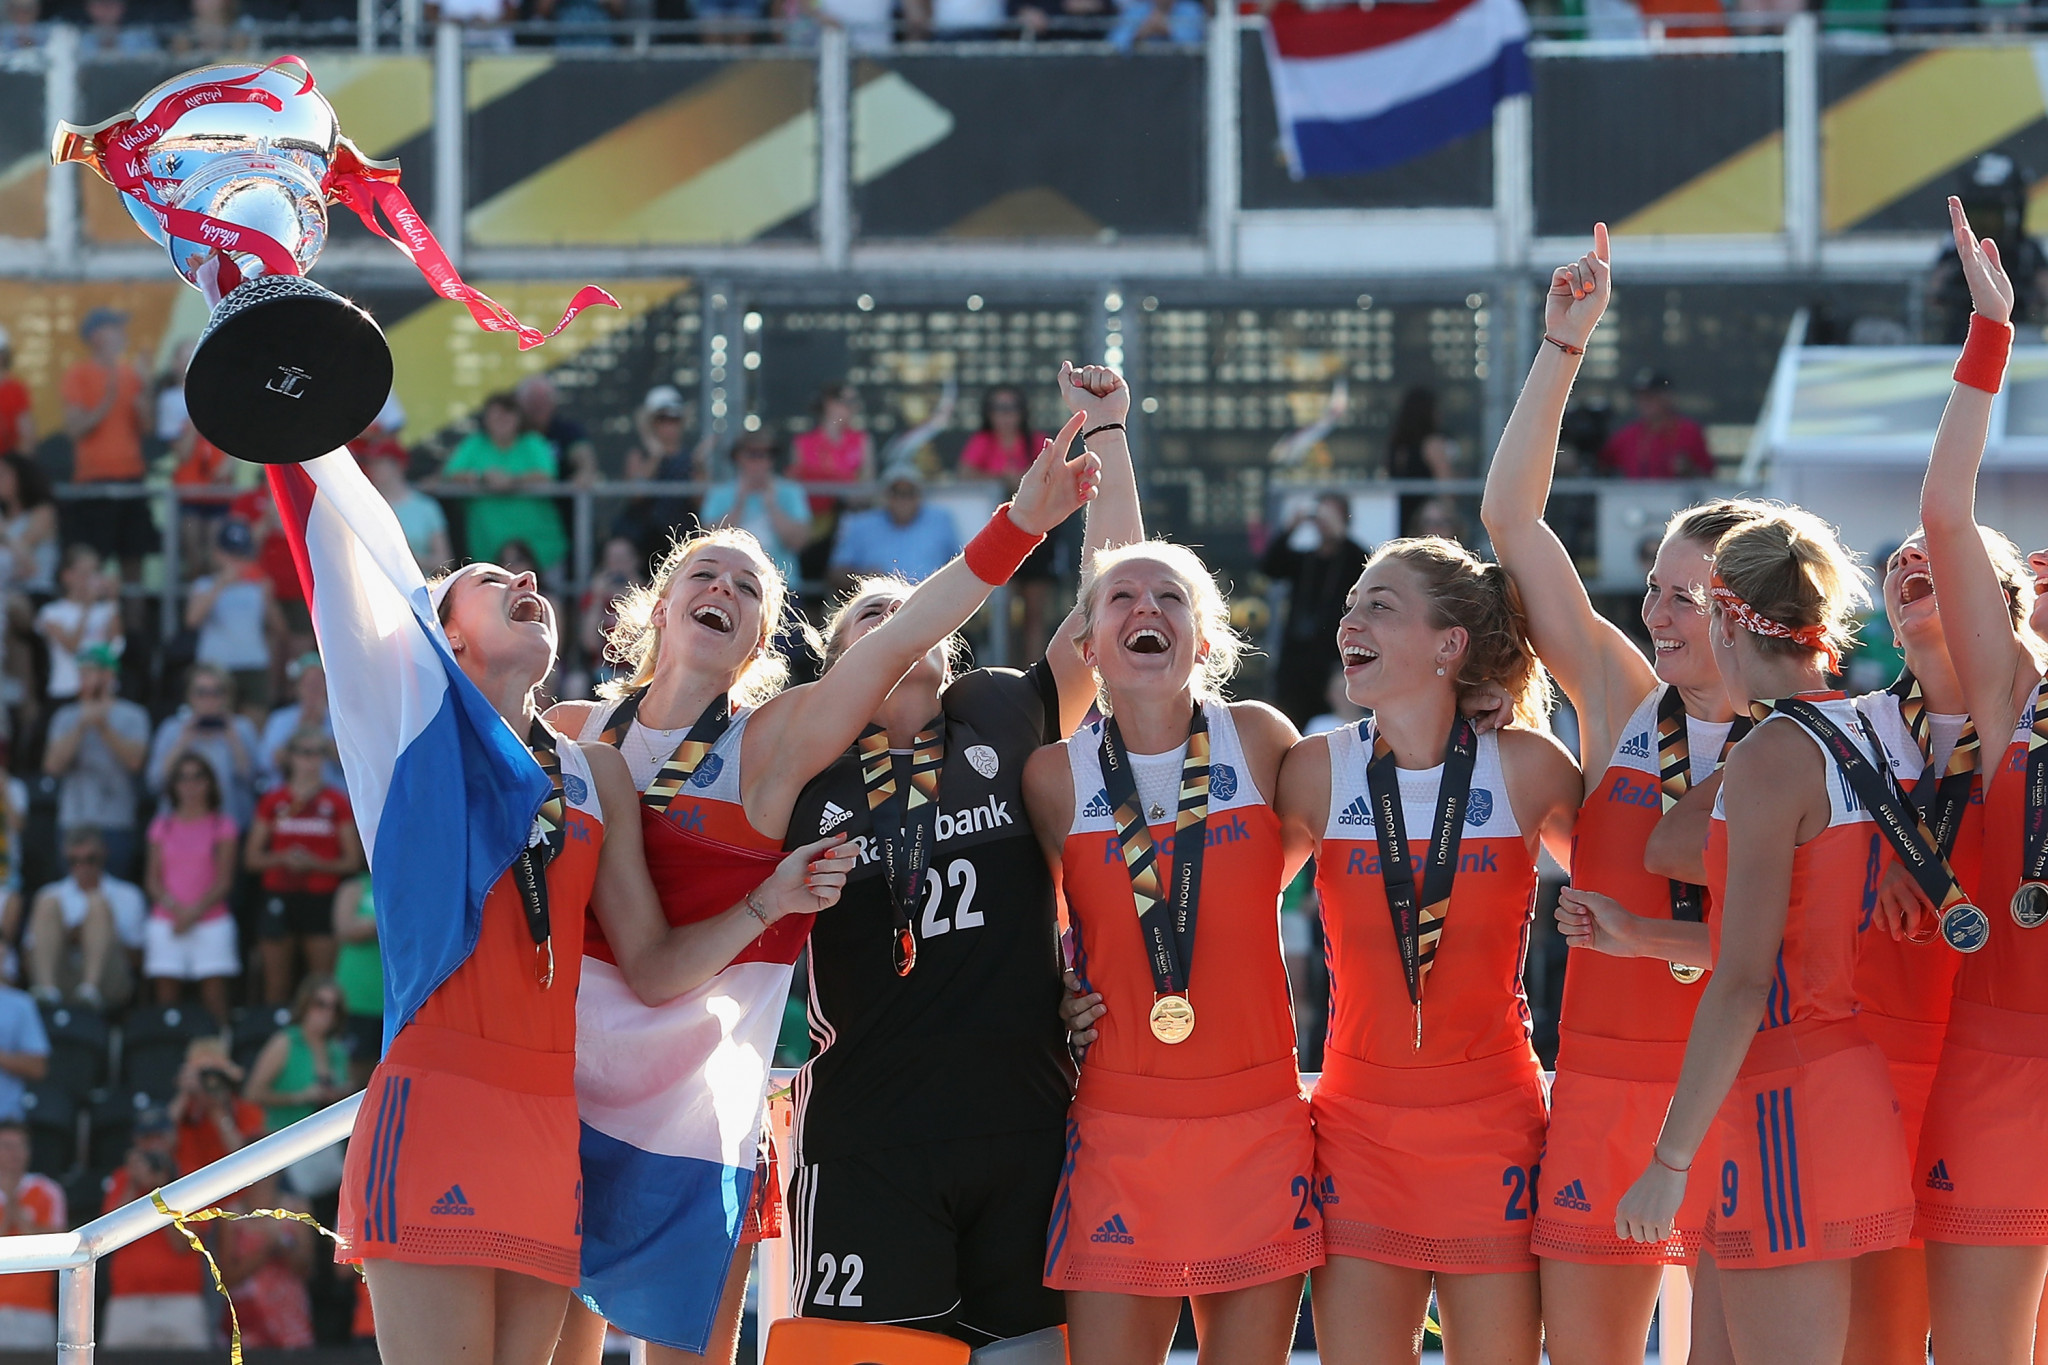 Ziggo Sport clinch deal with FIH for media rights in The Netherlands